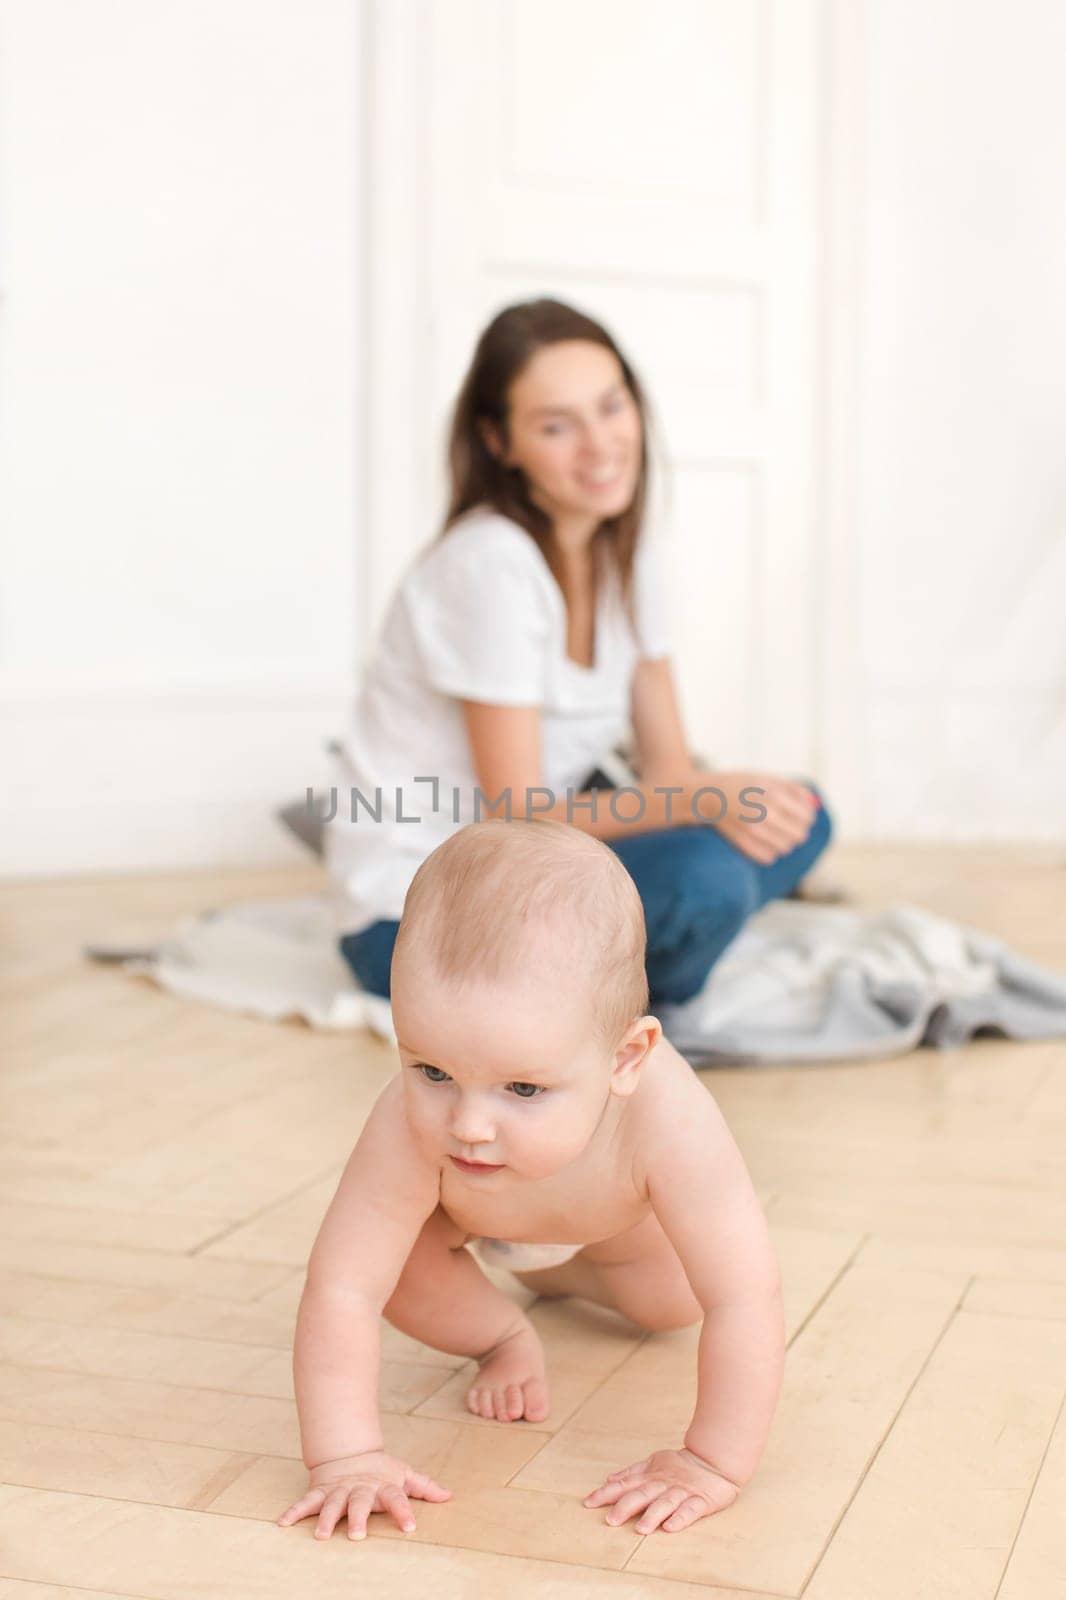 Happy mother watching little infant crawling on wooden floor at home looking concentrated.